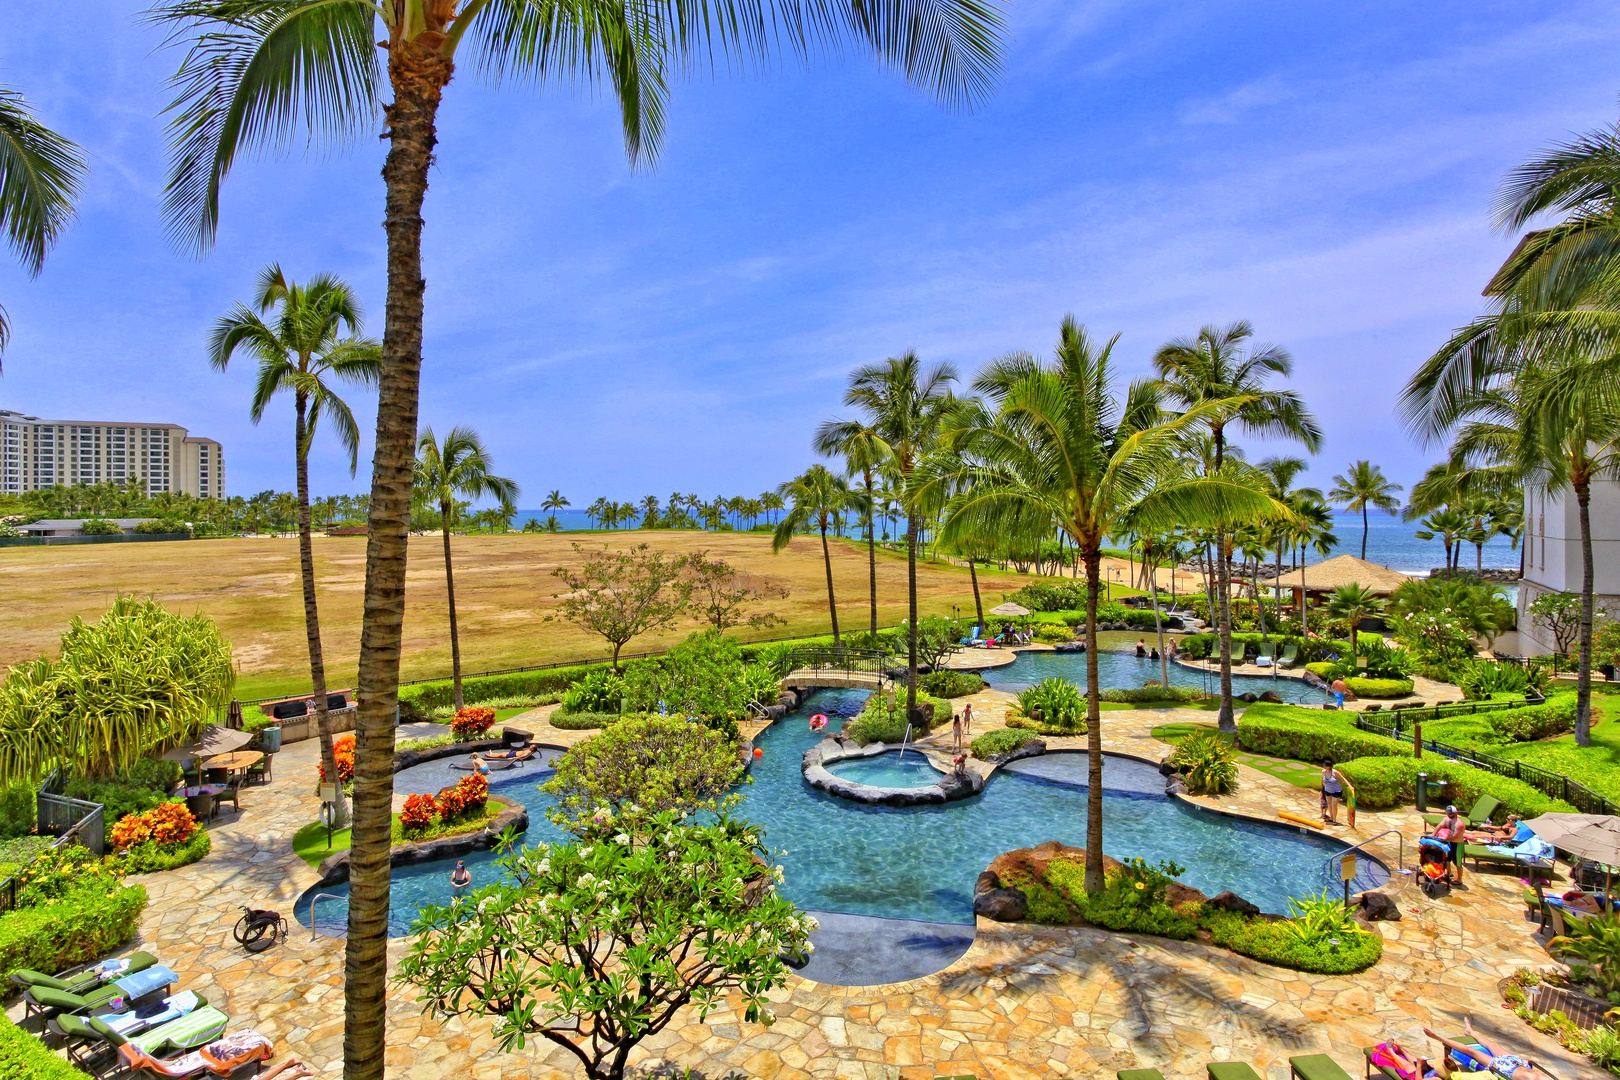 Kapolei Vacation Rentals, Ko Olina Beach Villas B610 - Take a dip in the pool, the lagoon or the sea under swaying palm trees.